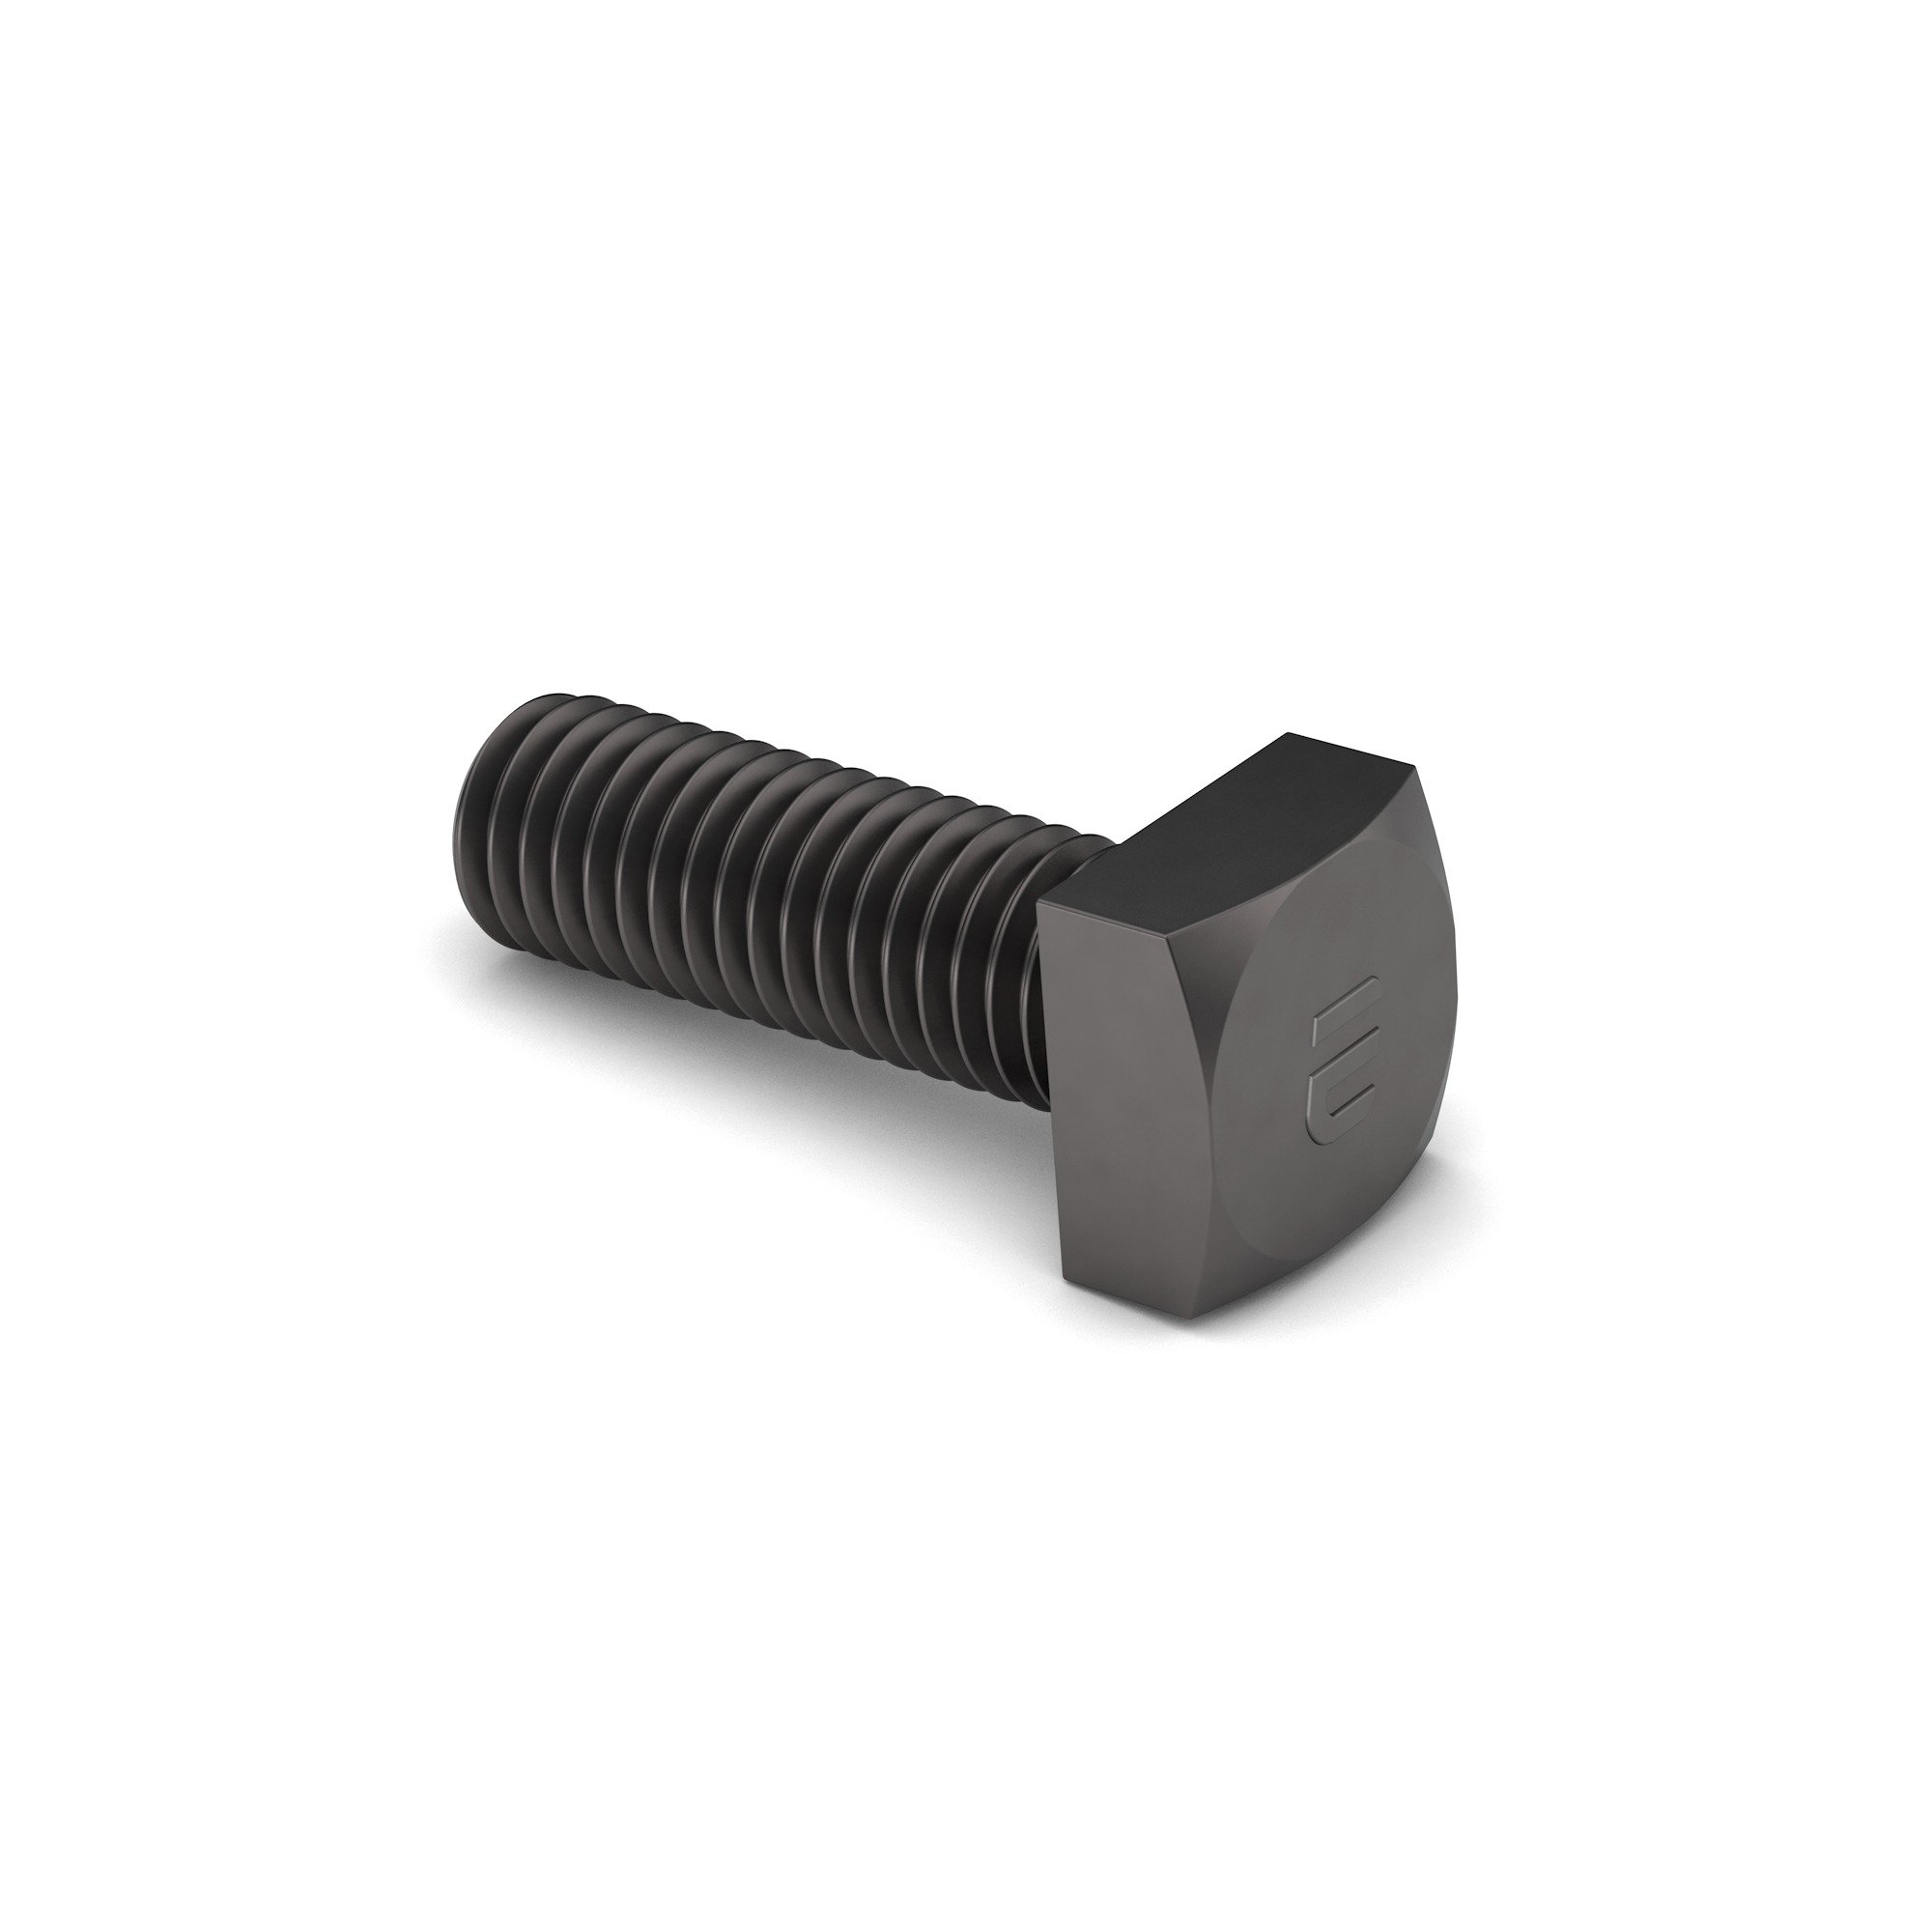 1-8x3 J429 GR 5 Square Hd Bolt Plain Finish w/ 1/4" hole drilled 1/4" center from bottom of bolt